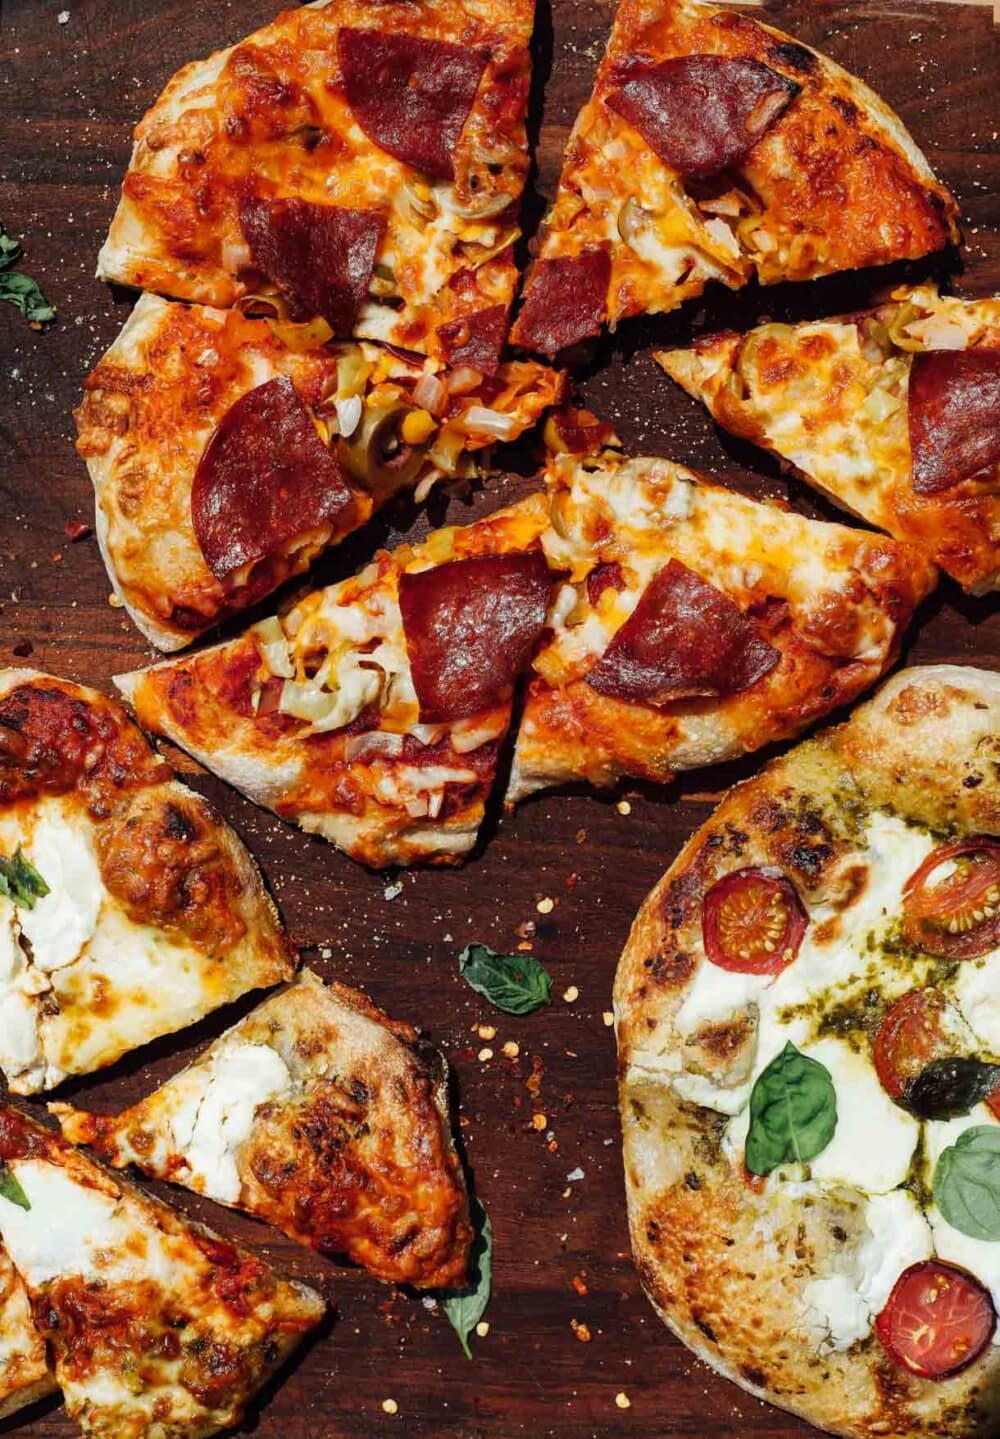 sourdough pizza cut into pieces on a wooden cutting board